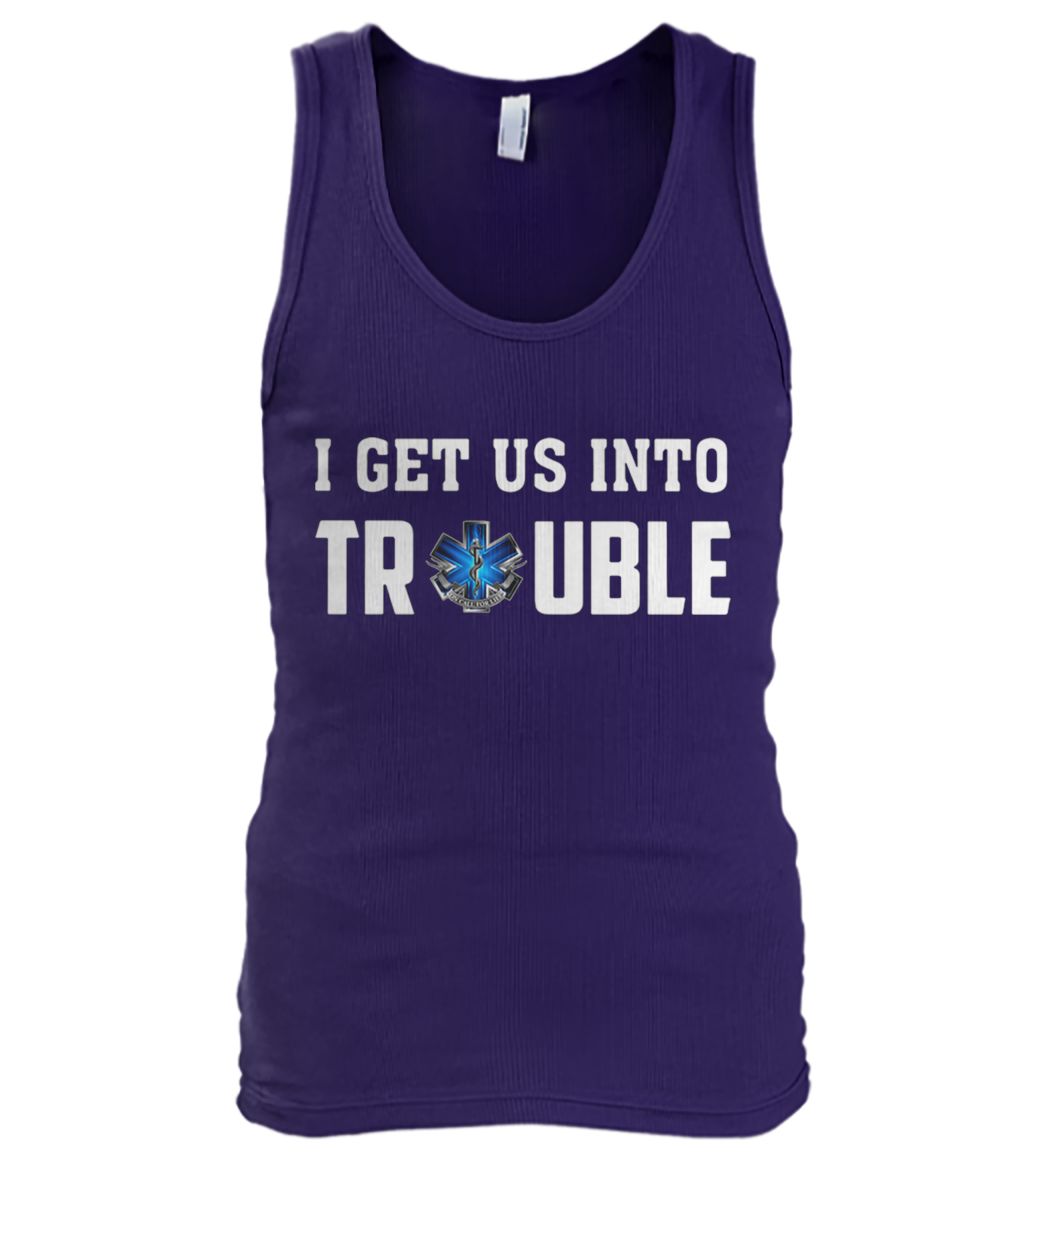 I get us into trouble on call for life blue snake men's tank top